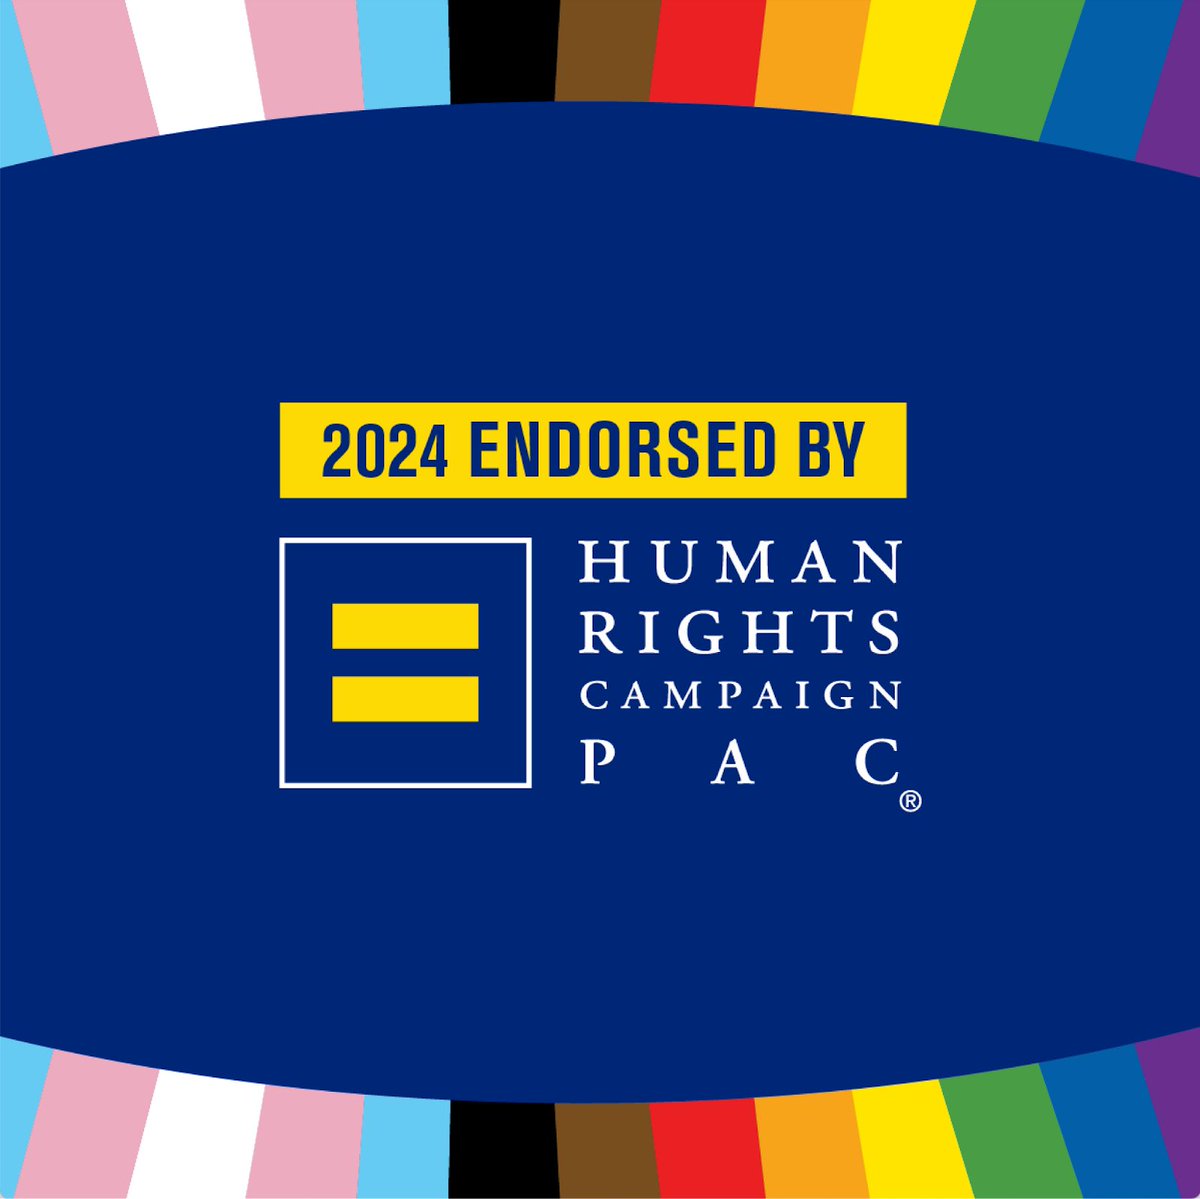 Honored to receive the Human Rights Campaign PAC’s endorsement for my 2024 reelection! Proud to stand with the LGBTQ+ community in the fight for equality for all. @HRC